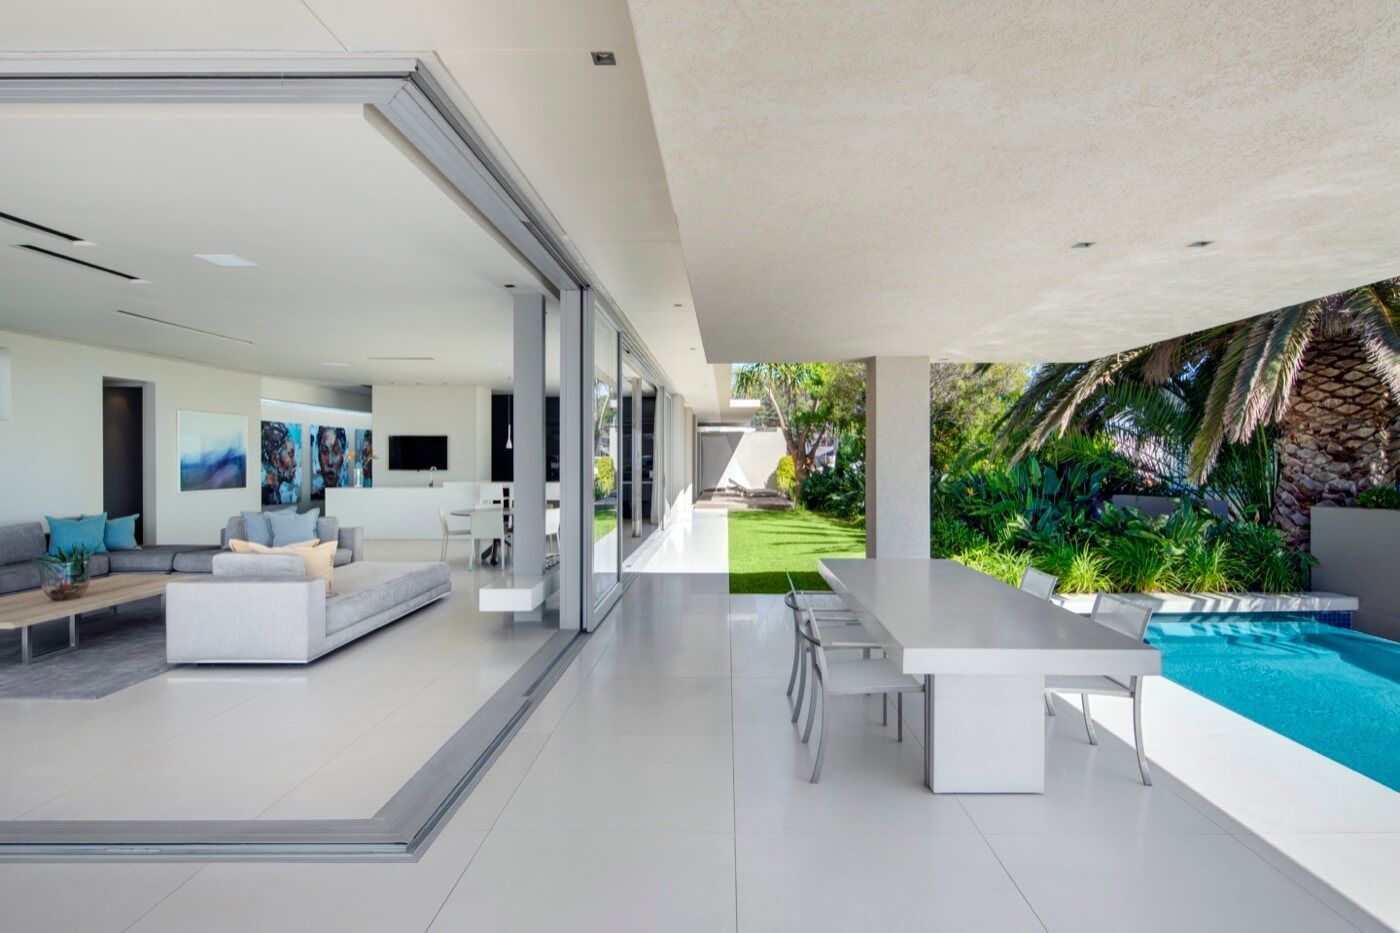 Photo 36 of The Crescent accommodation in Camps Bay, Cape Town with 6 bedrooms and 6.5 bathrooms